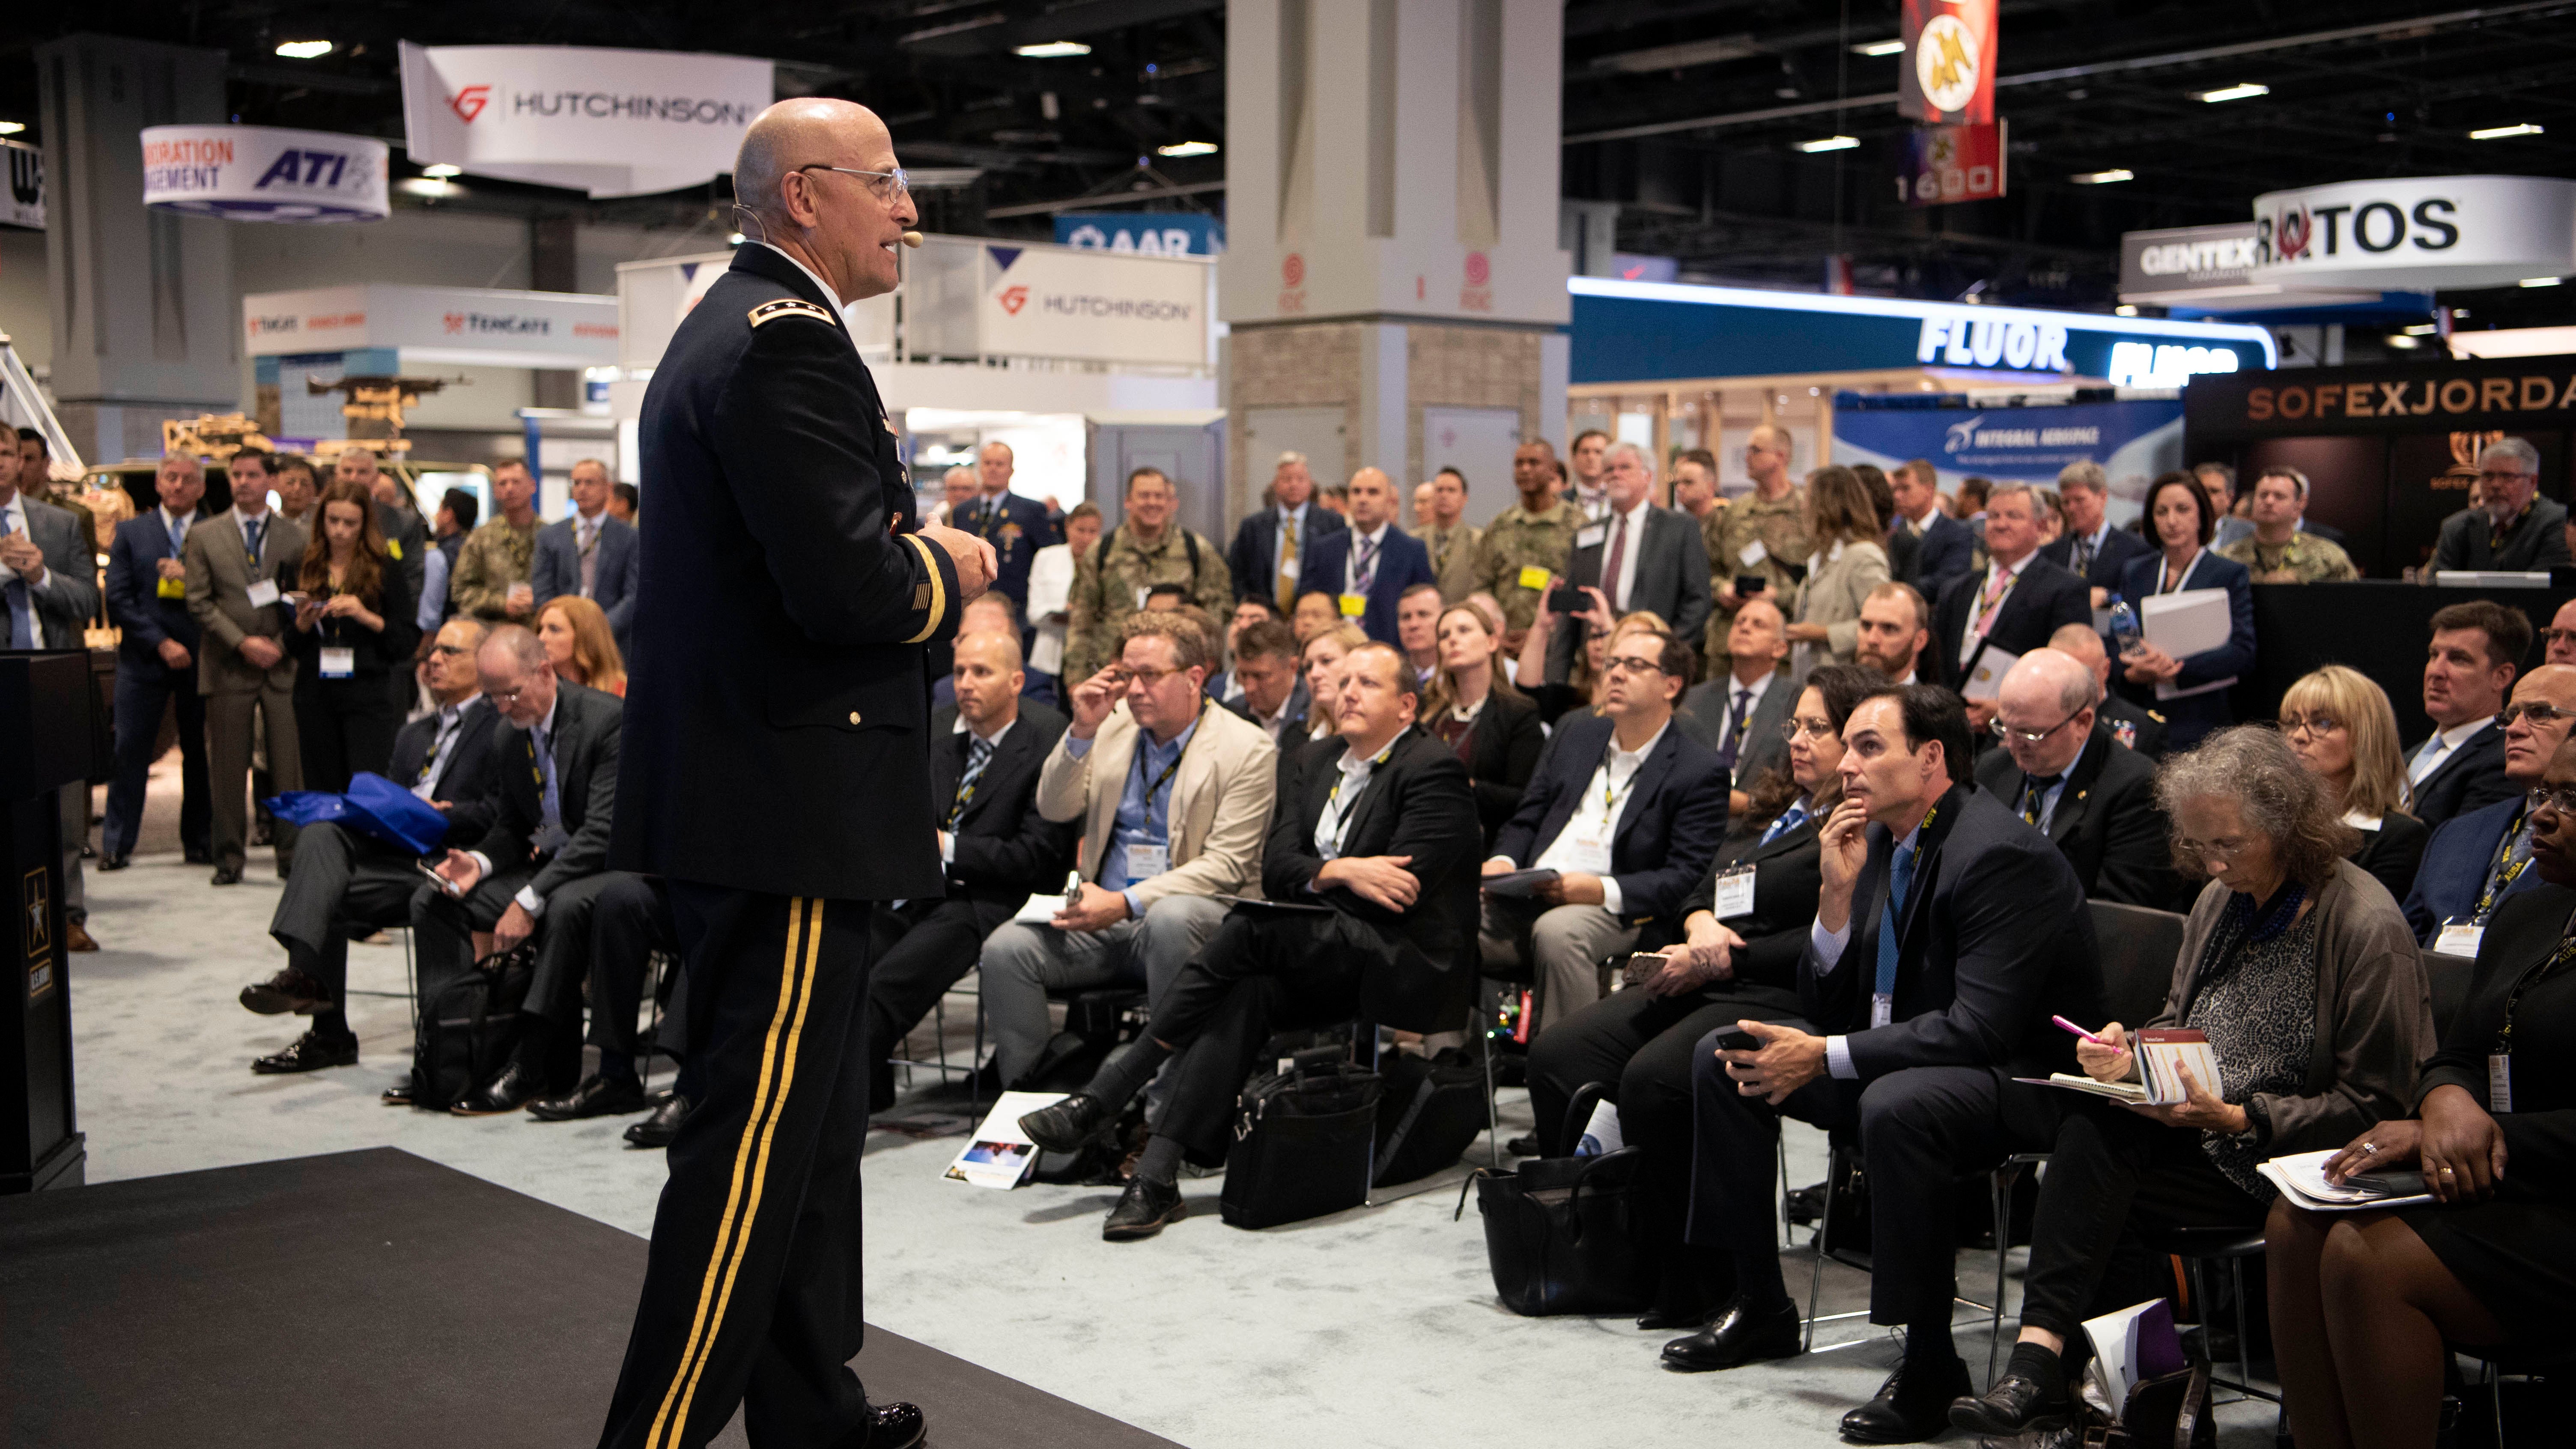 LTG Neil Thurgood addresses attendees at a Delivering Hypersonics  discussion at the 2019 AUSA Annual Meeting and Exposition at the Washington Convention Center on Oct. 14, 2019.